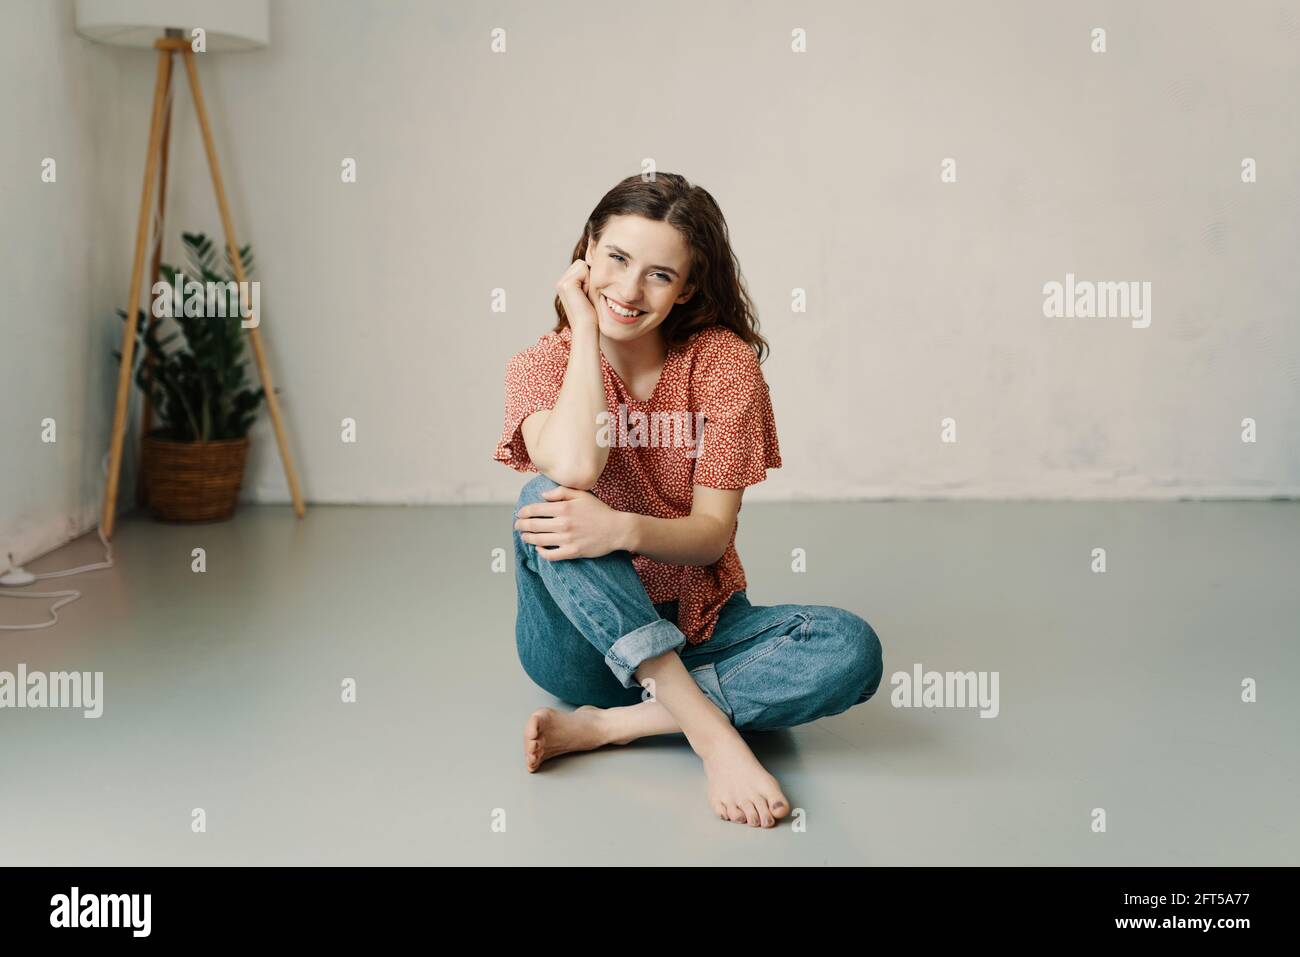 Happy young woman with a lovely beaming smile relaxing barefoot on the floor with chin on hand grinning at the camera with copyspace Stock Photo